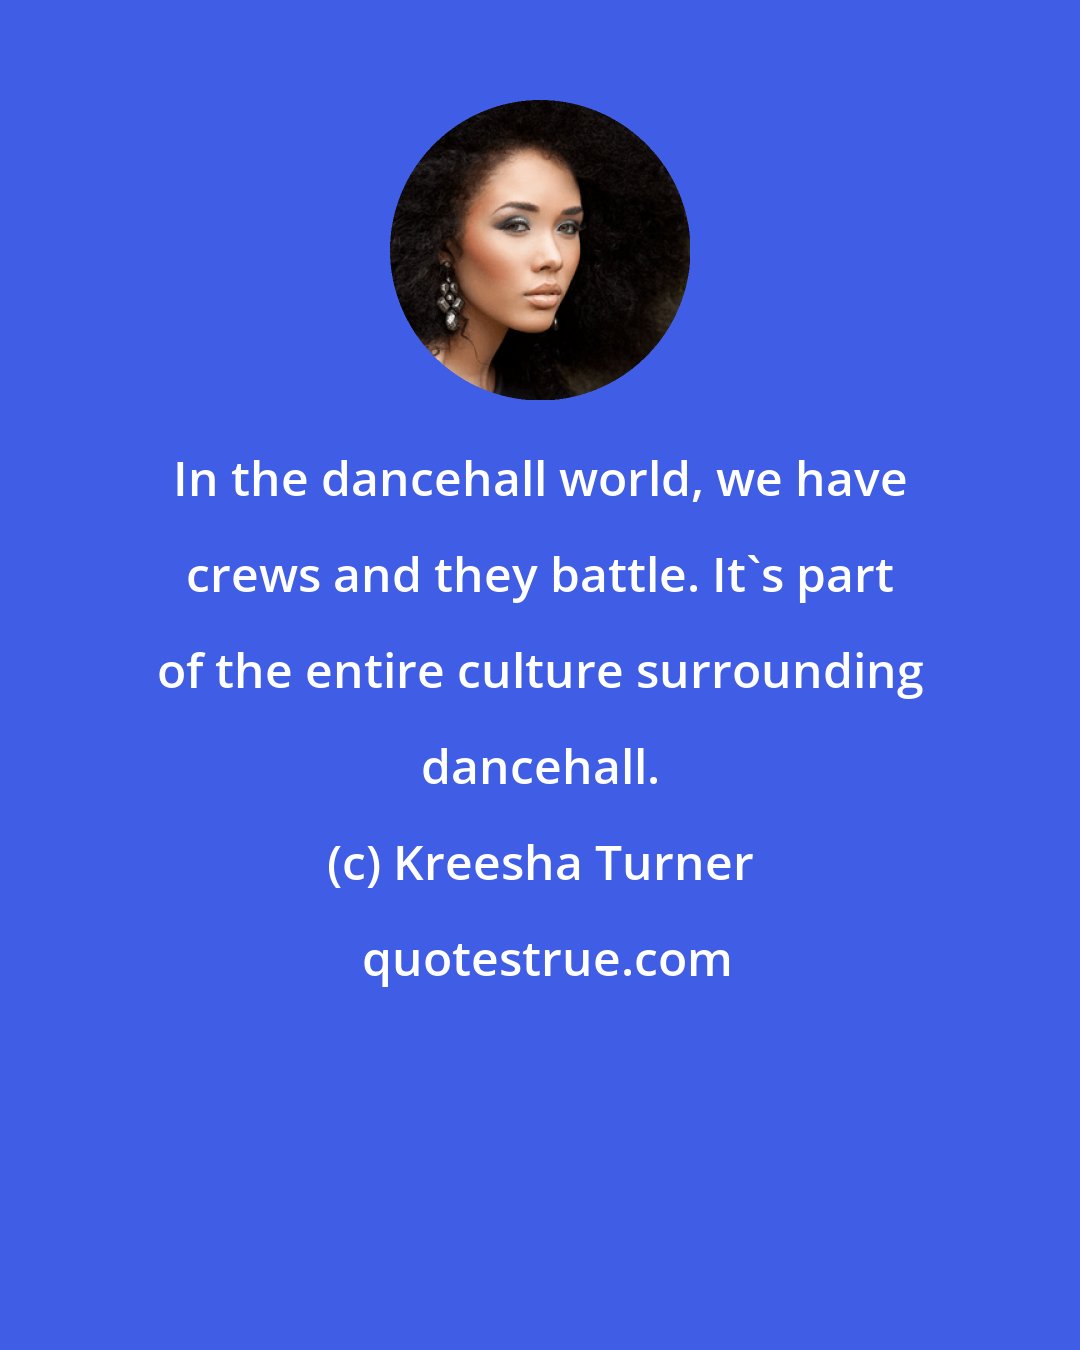 Kreesha Turner: In the dancehall world, we have crews and they battle. It's part of the entire culture surrounding dancehall.